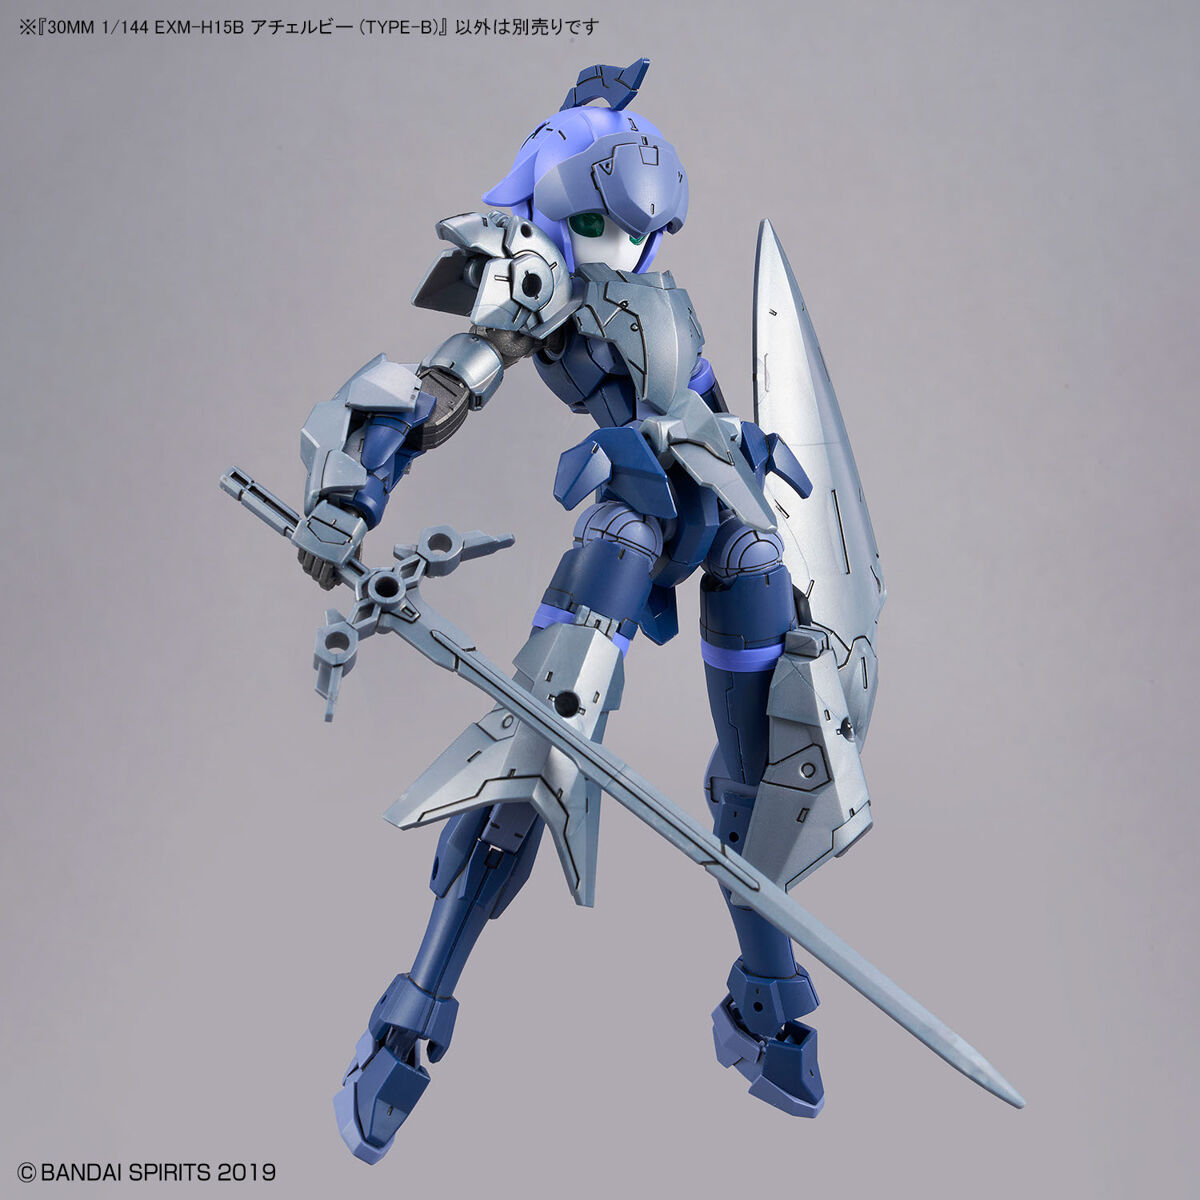 Pre-order] 30 Minutes Missions Acerby (Type-B) – Tabletop